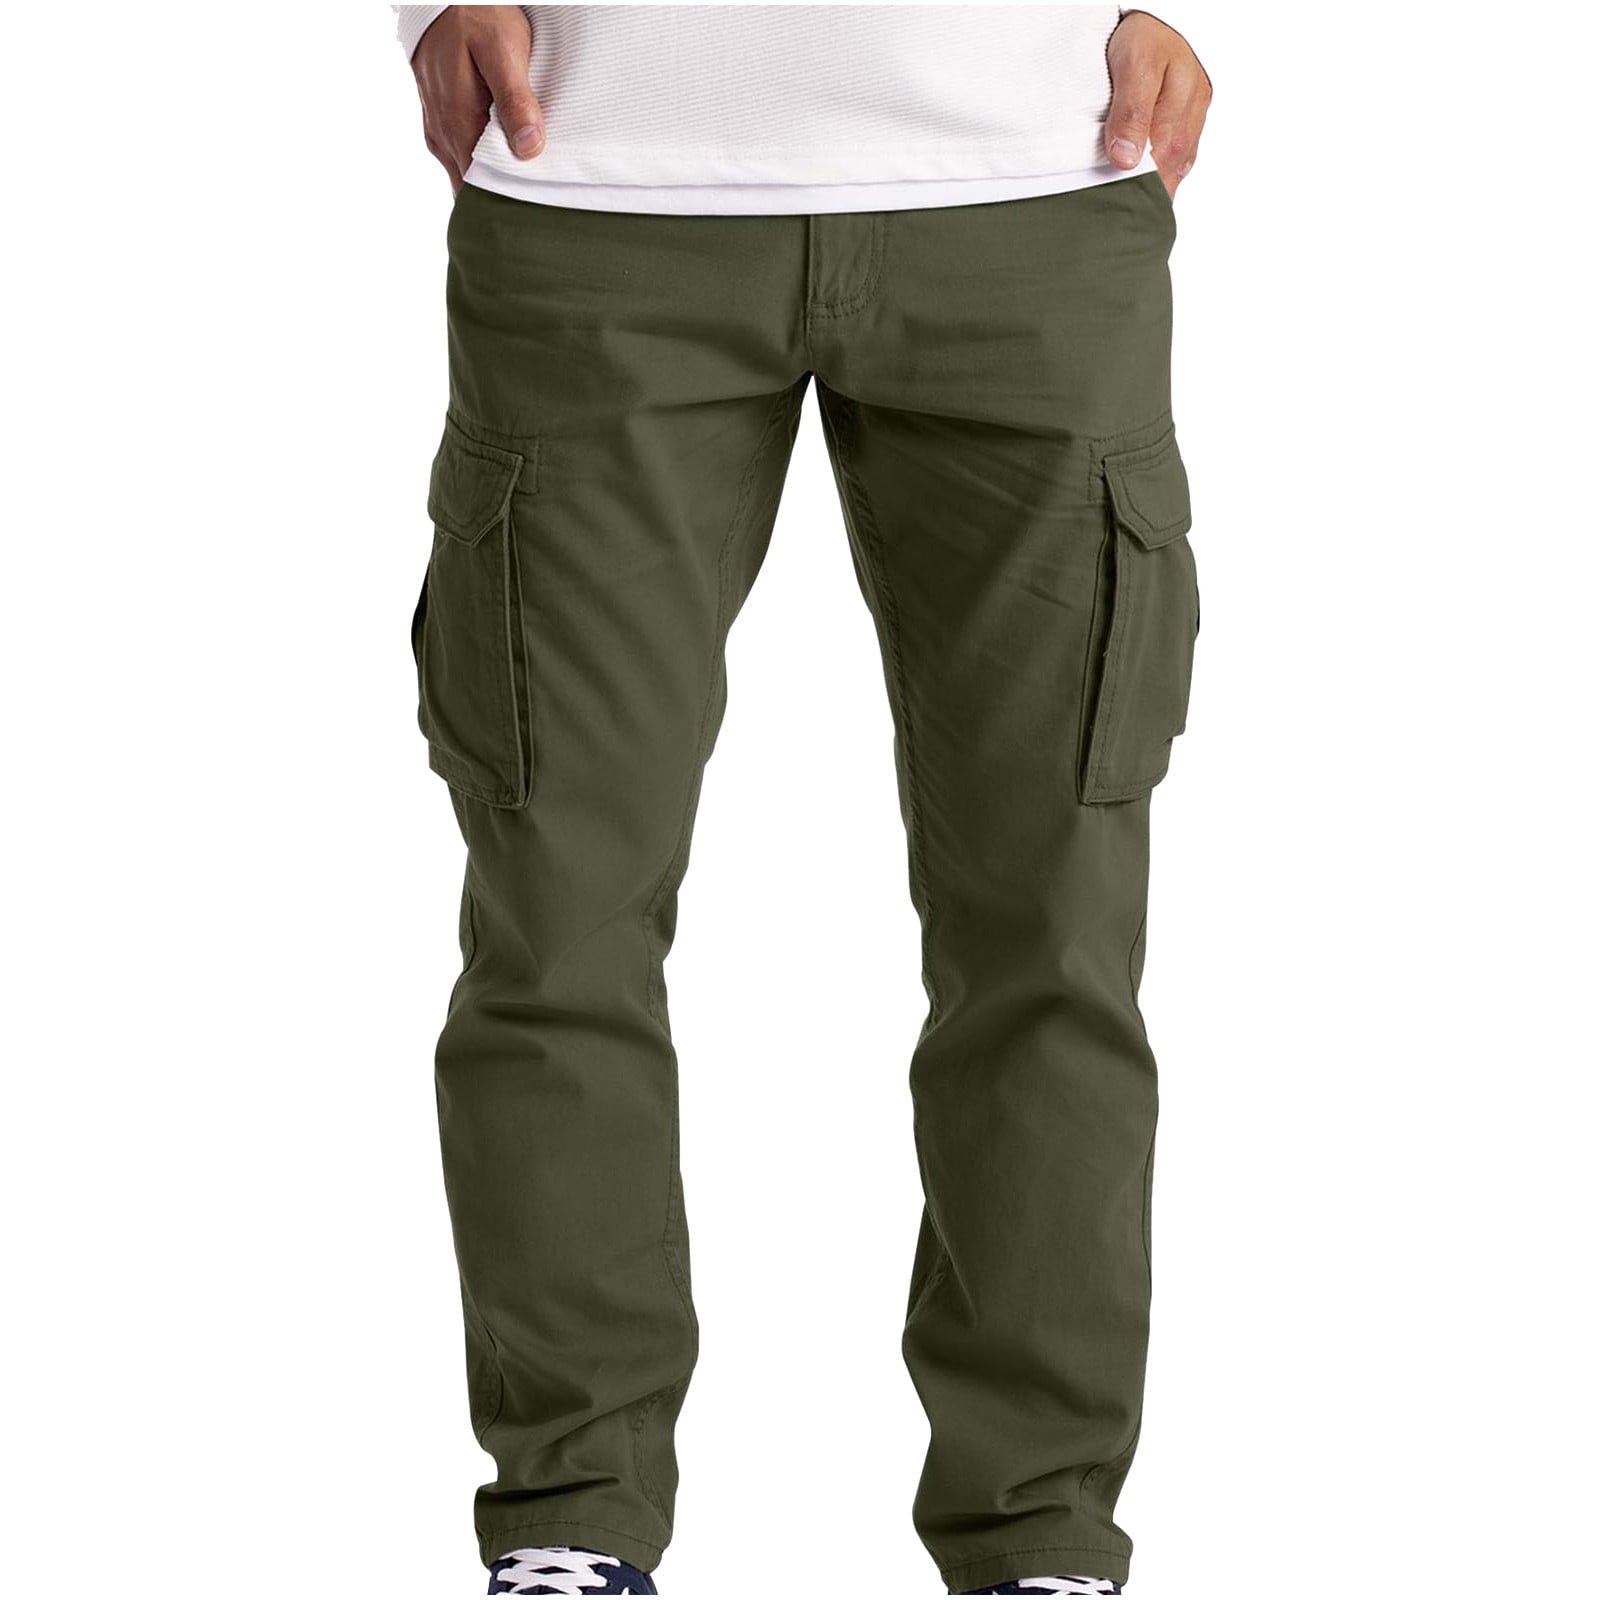 FAFWYP Men's Stretch Cargo Pants Slim Fit with 6 Pockets Work Wear Combat  Safety Cargo Full Pants Elastic Waist Trousers for Military, Police,  Outdoor